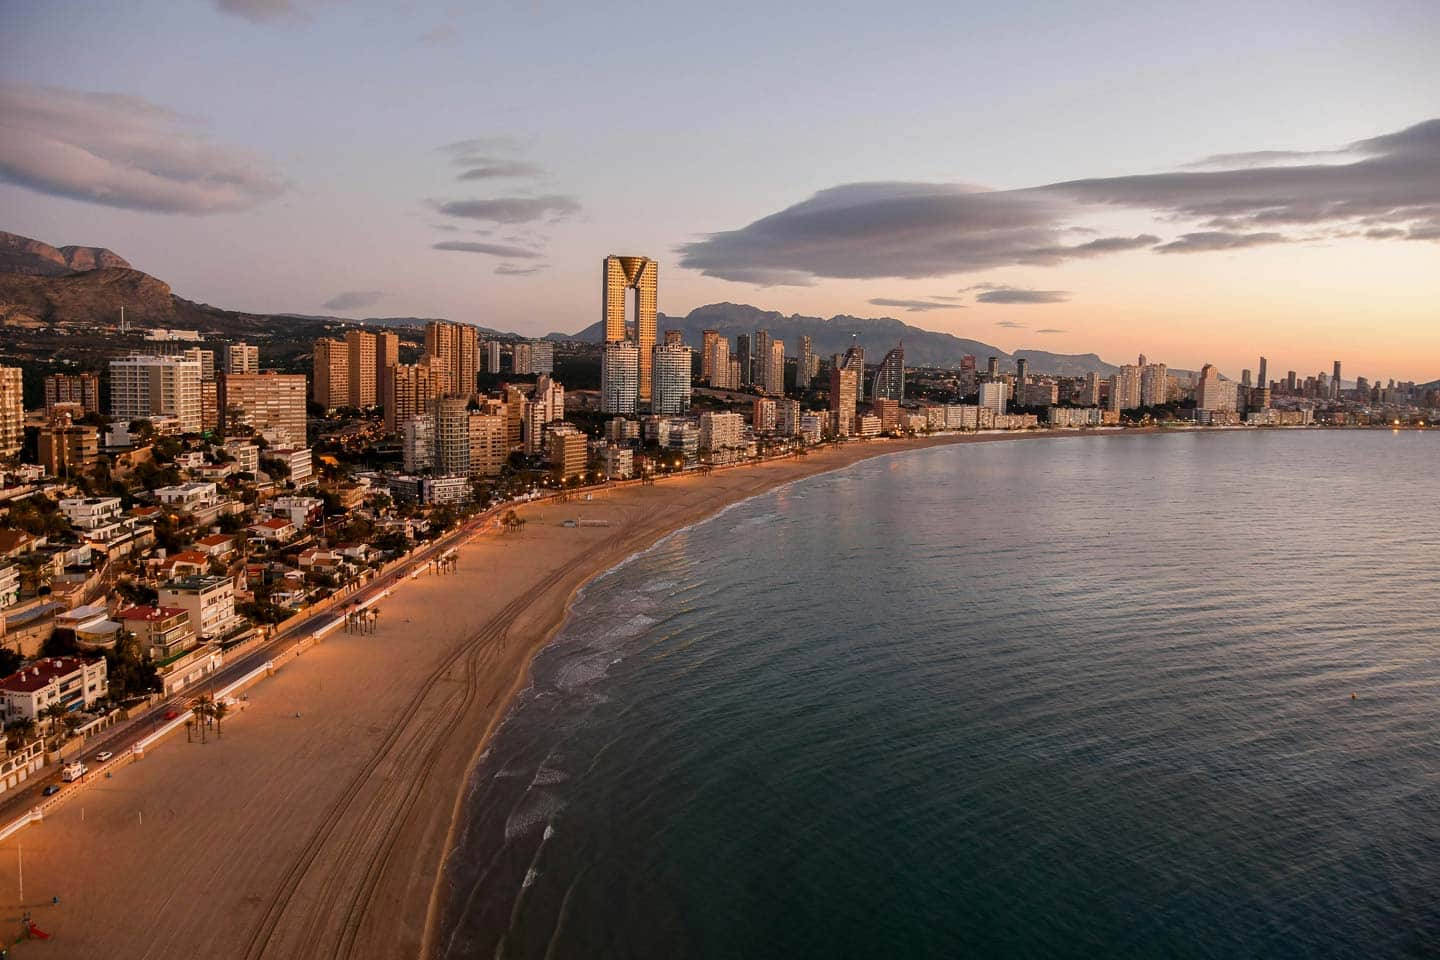 Views of the beach, ocean and city scape in Benidorm